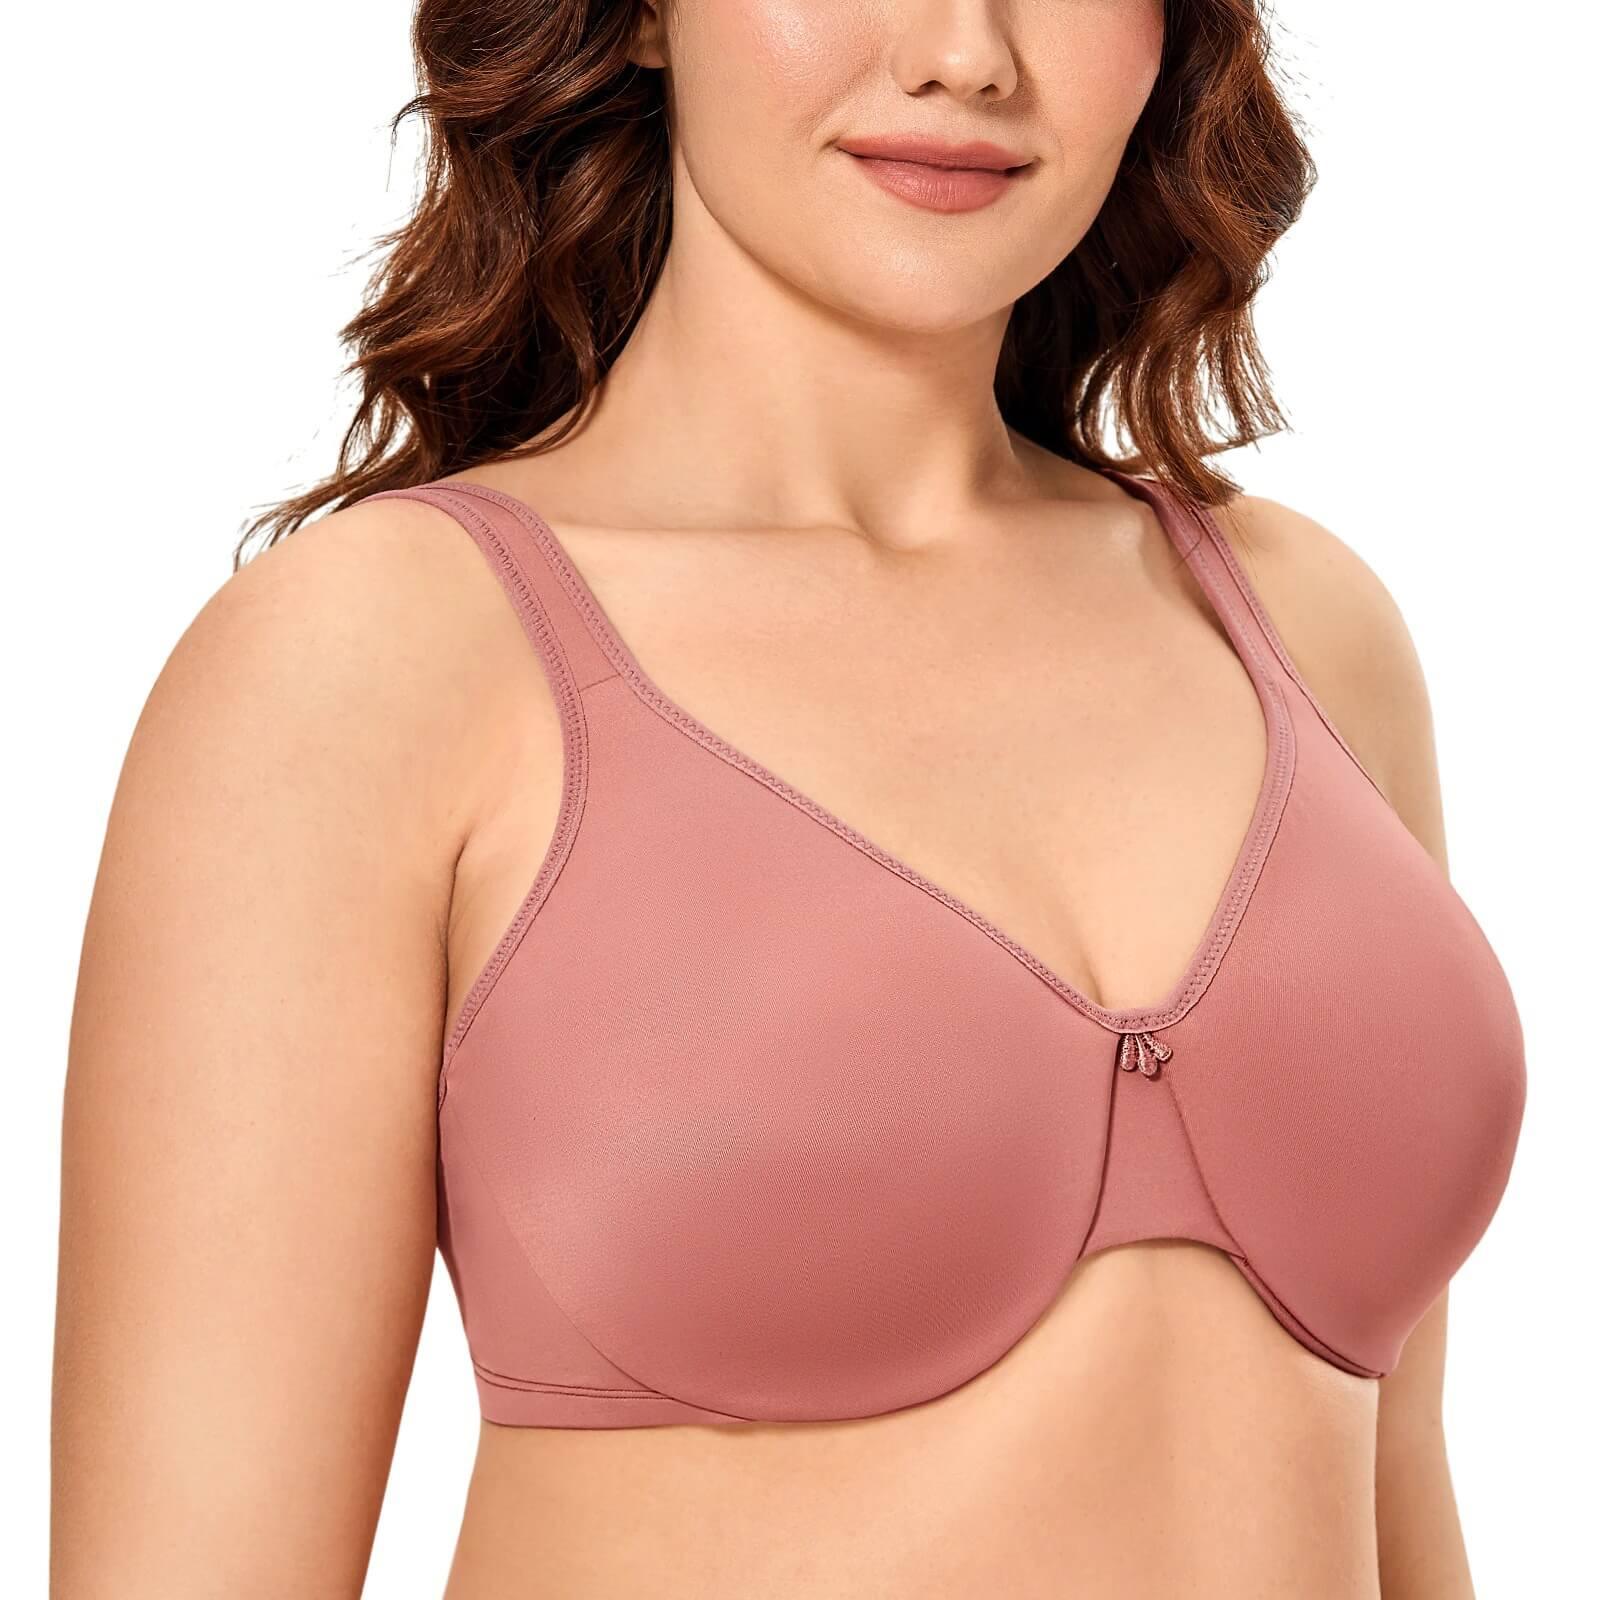  Womens Minimizer Bra Plus Size Underwire Smooth Full  Coverage Seamless Bras True Red 32D